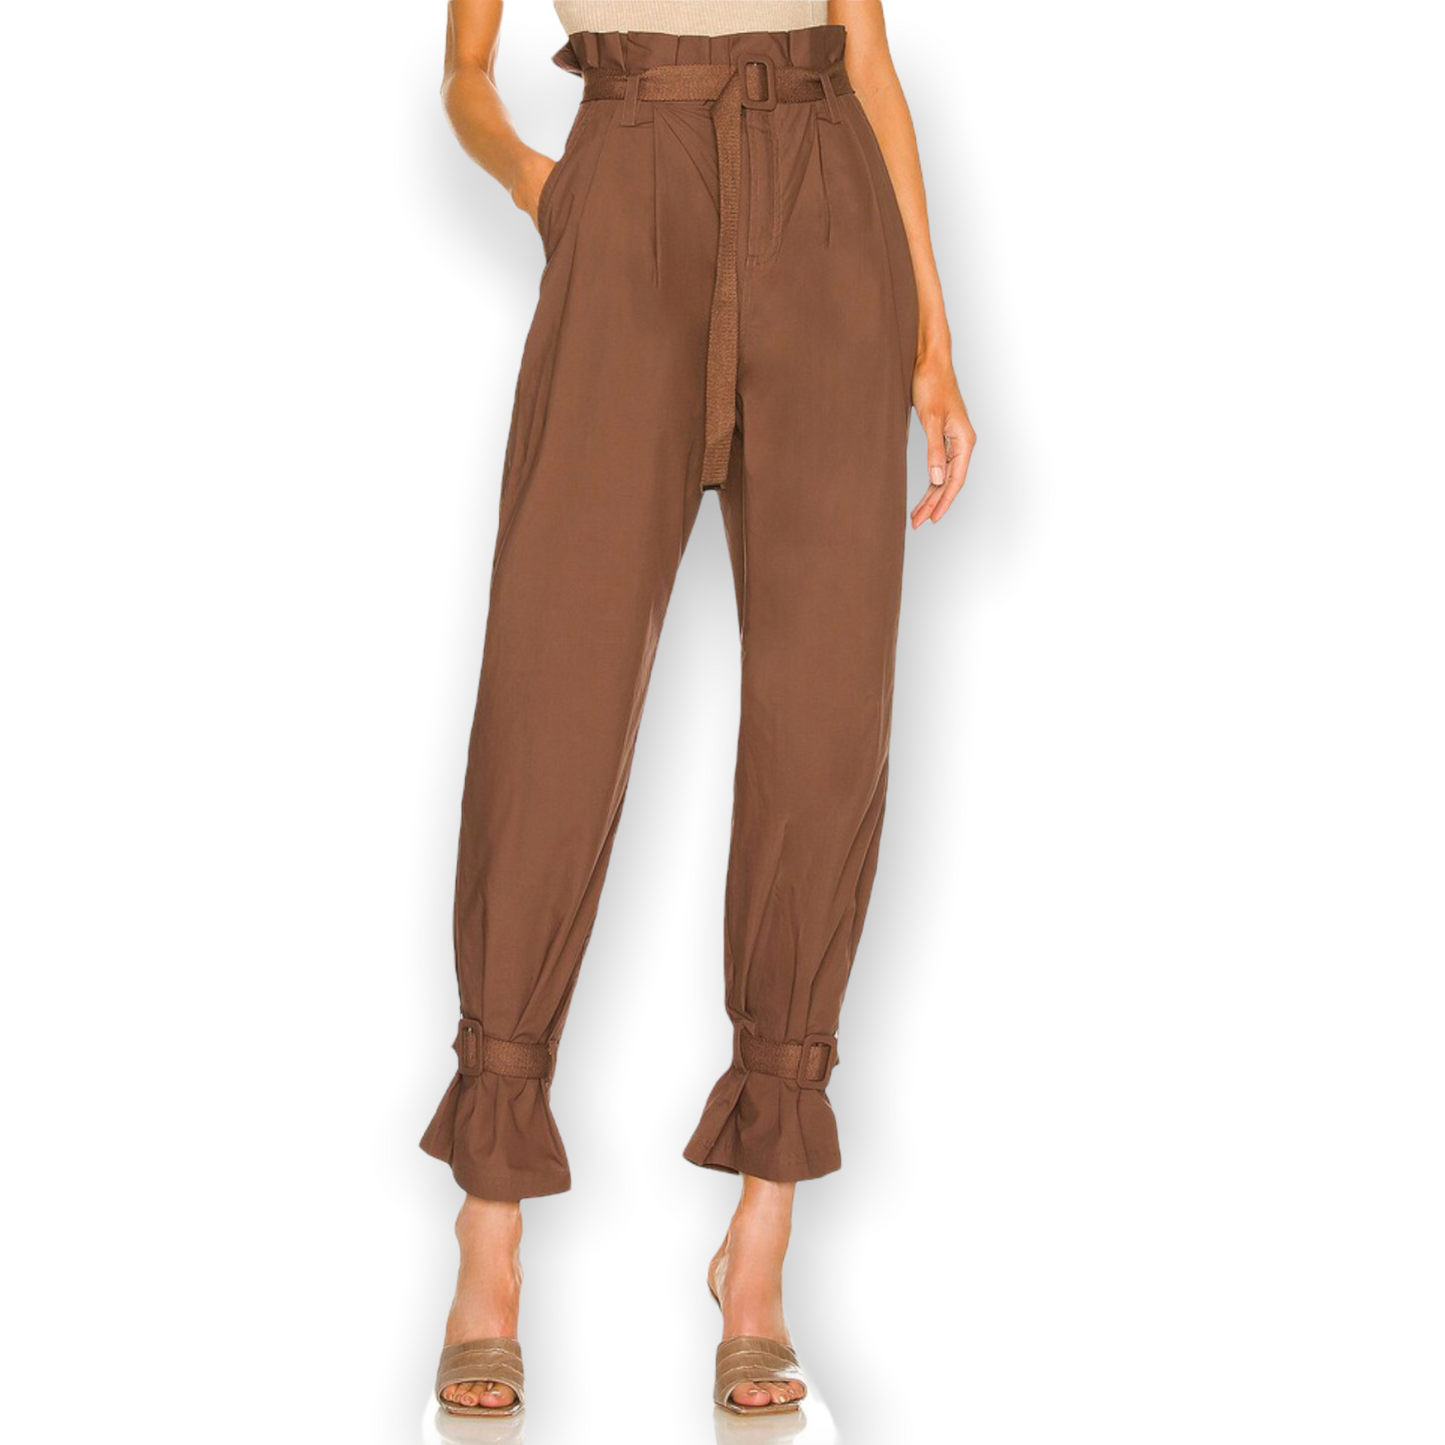 The Virgil Pant in Chocolate BrownL'Academie Wide Leg Small